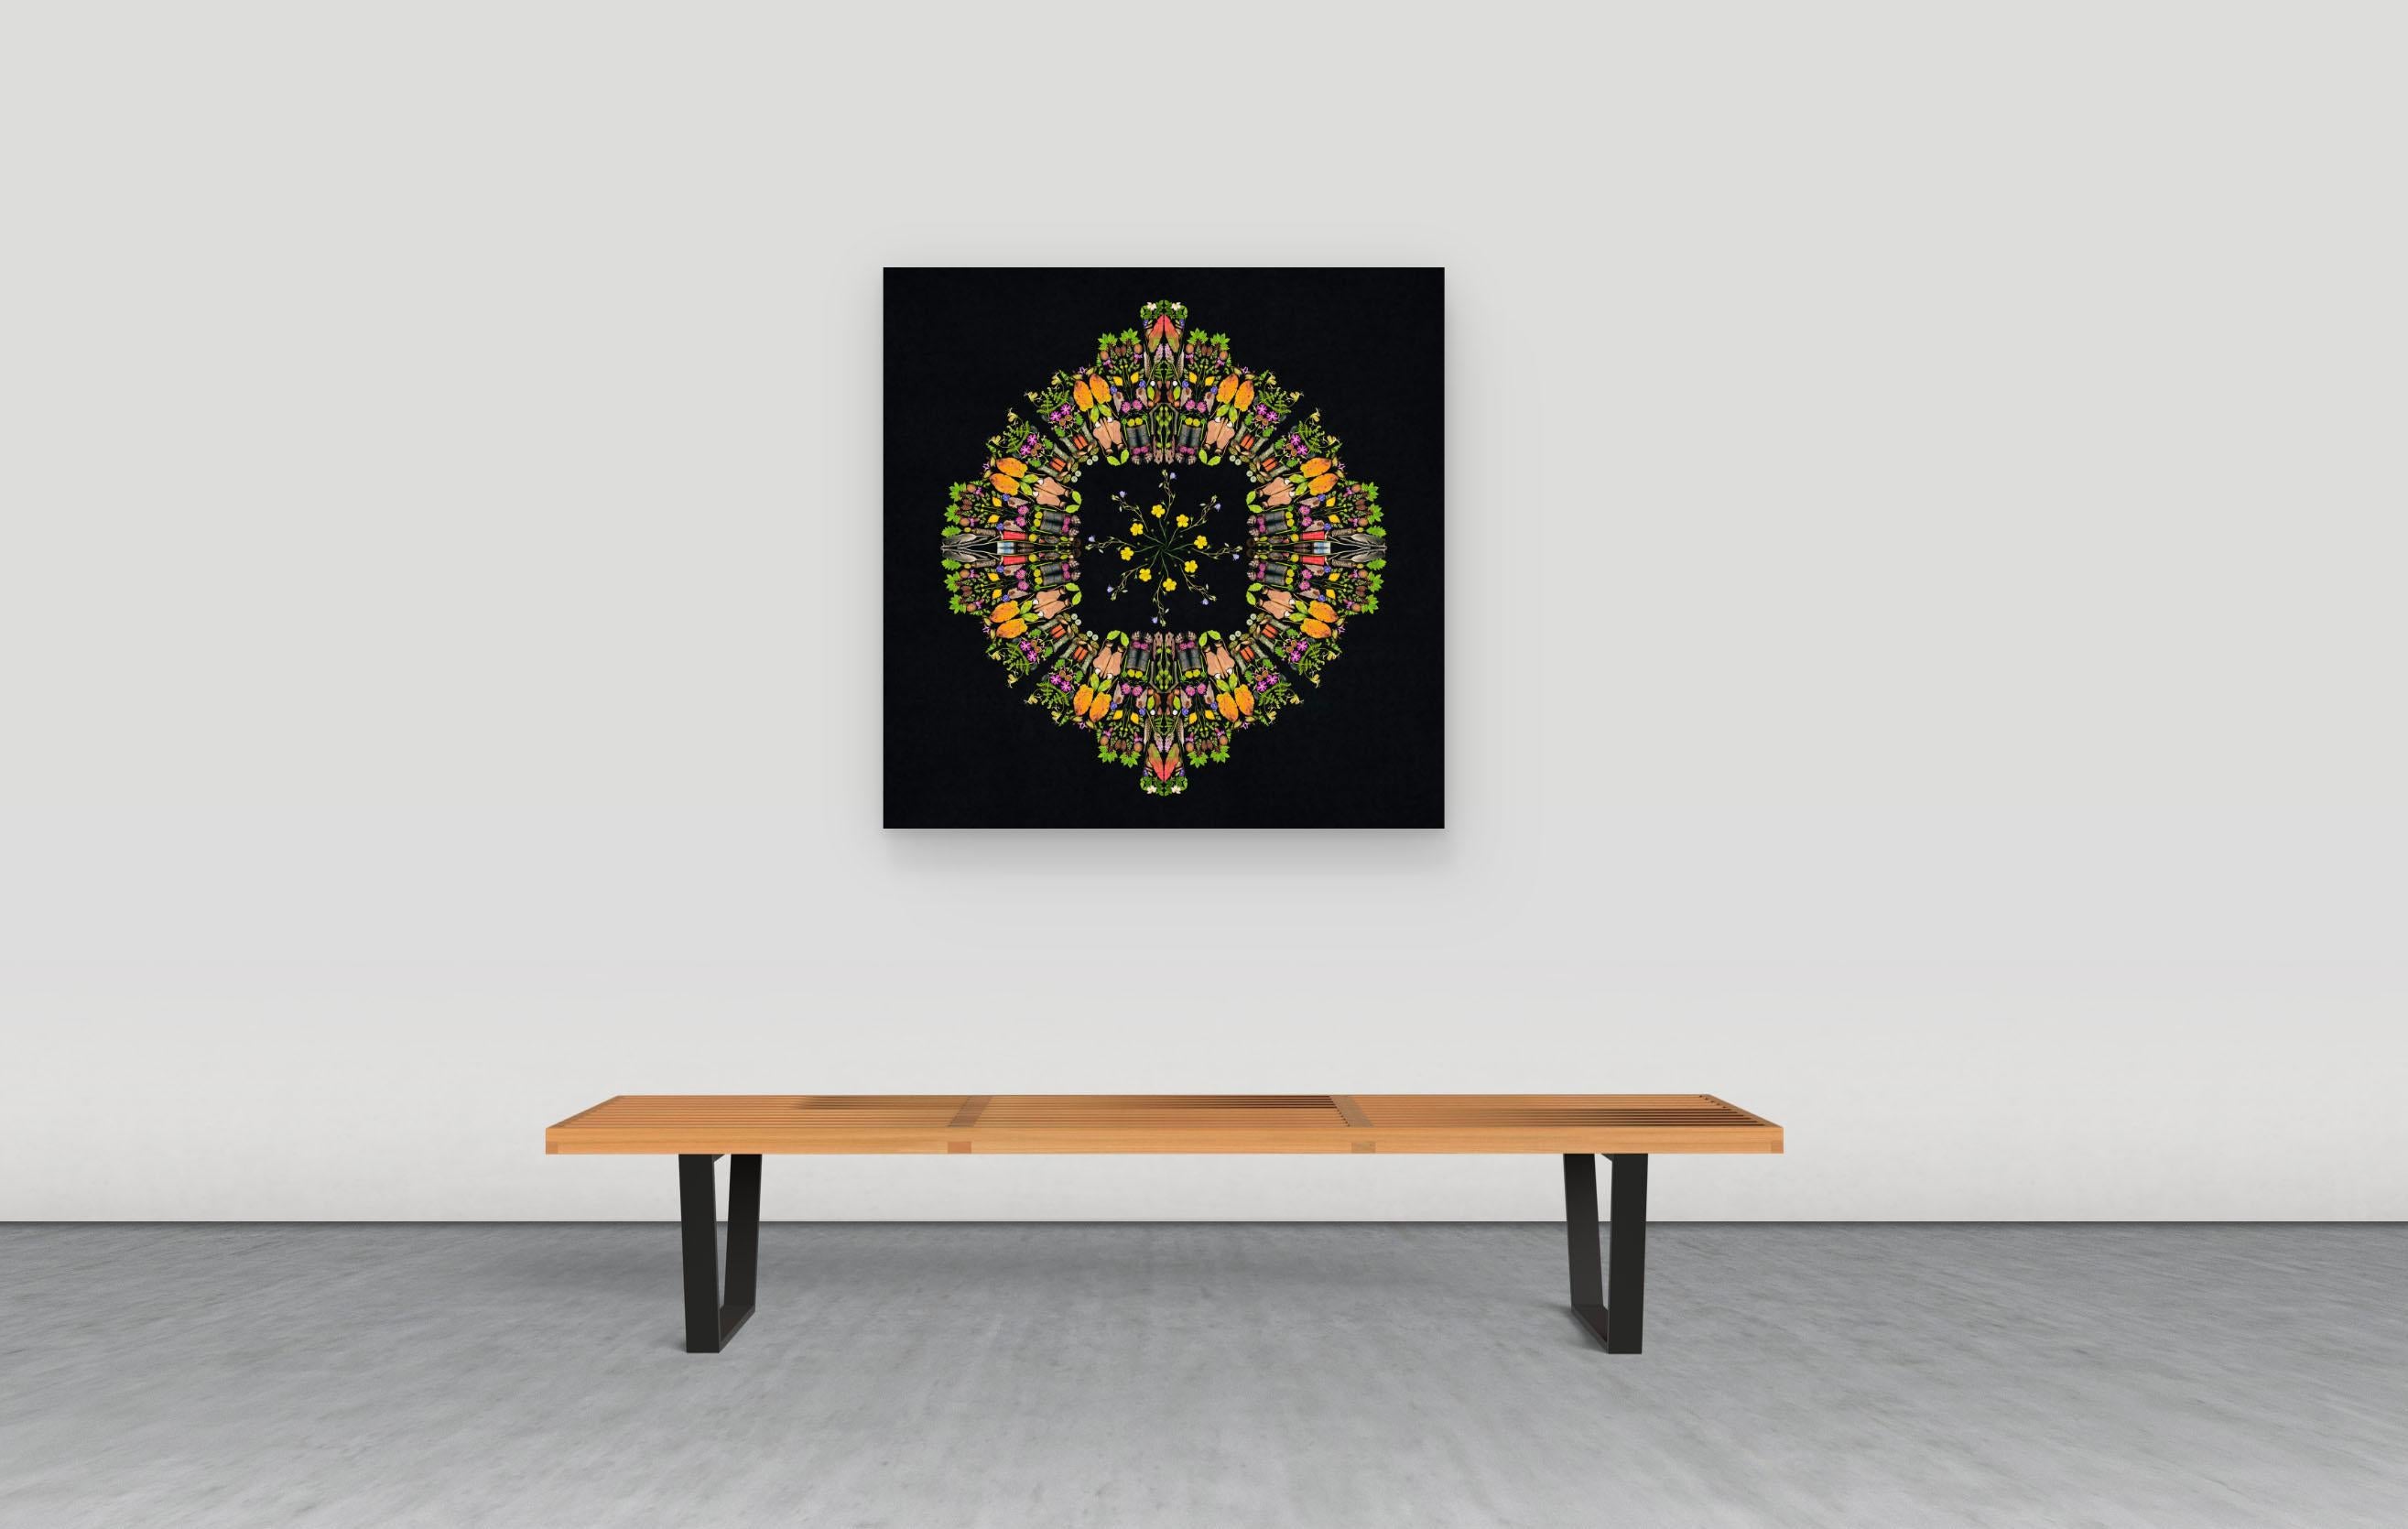 Ancient Woodland, North Norfolk, Mandala and Collage of Woodland Nature - Tribal Print by George McLeod